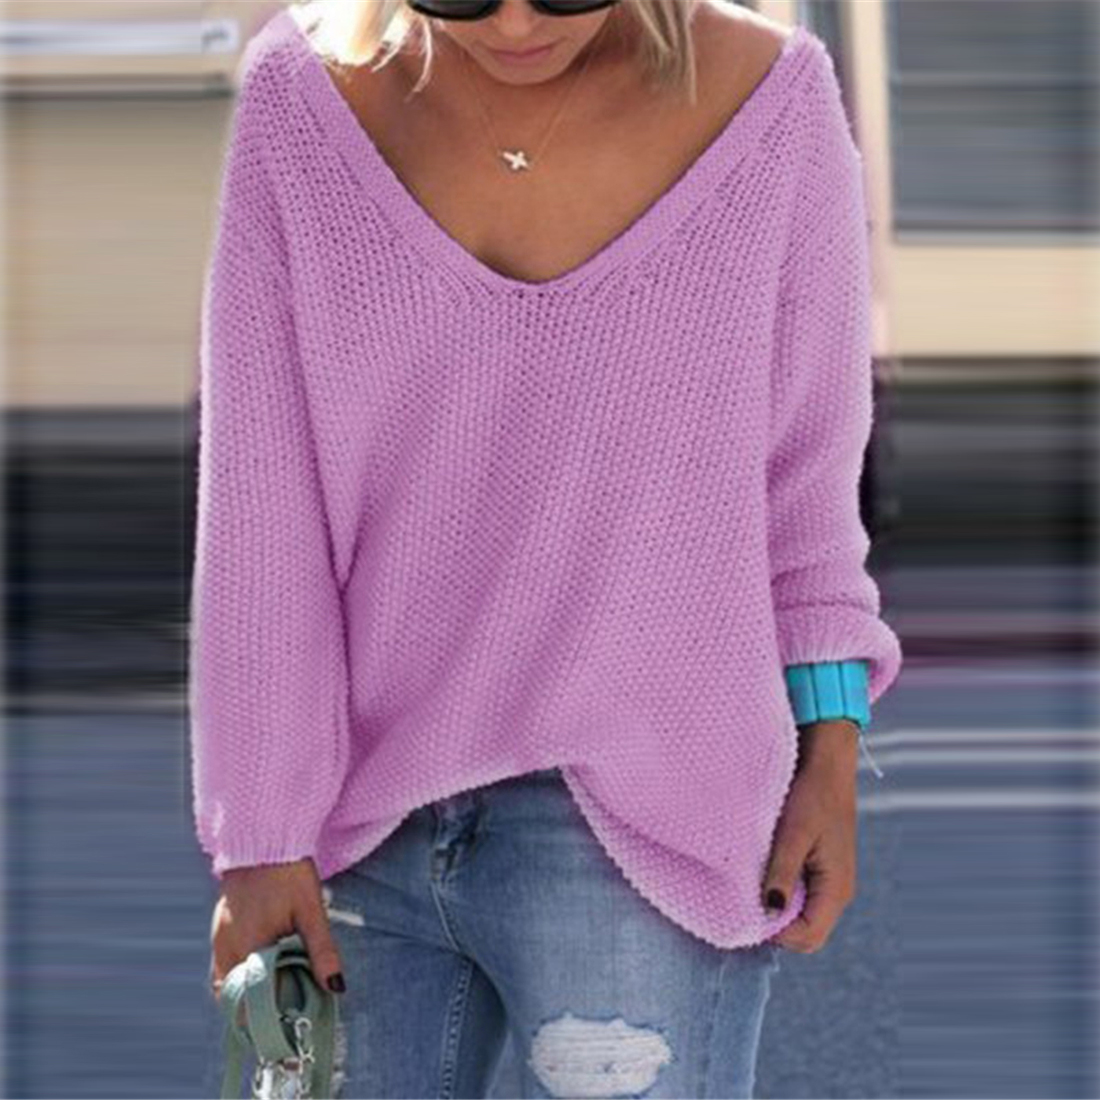 V-neck Loose Knit Pure Color Pullover Sweater